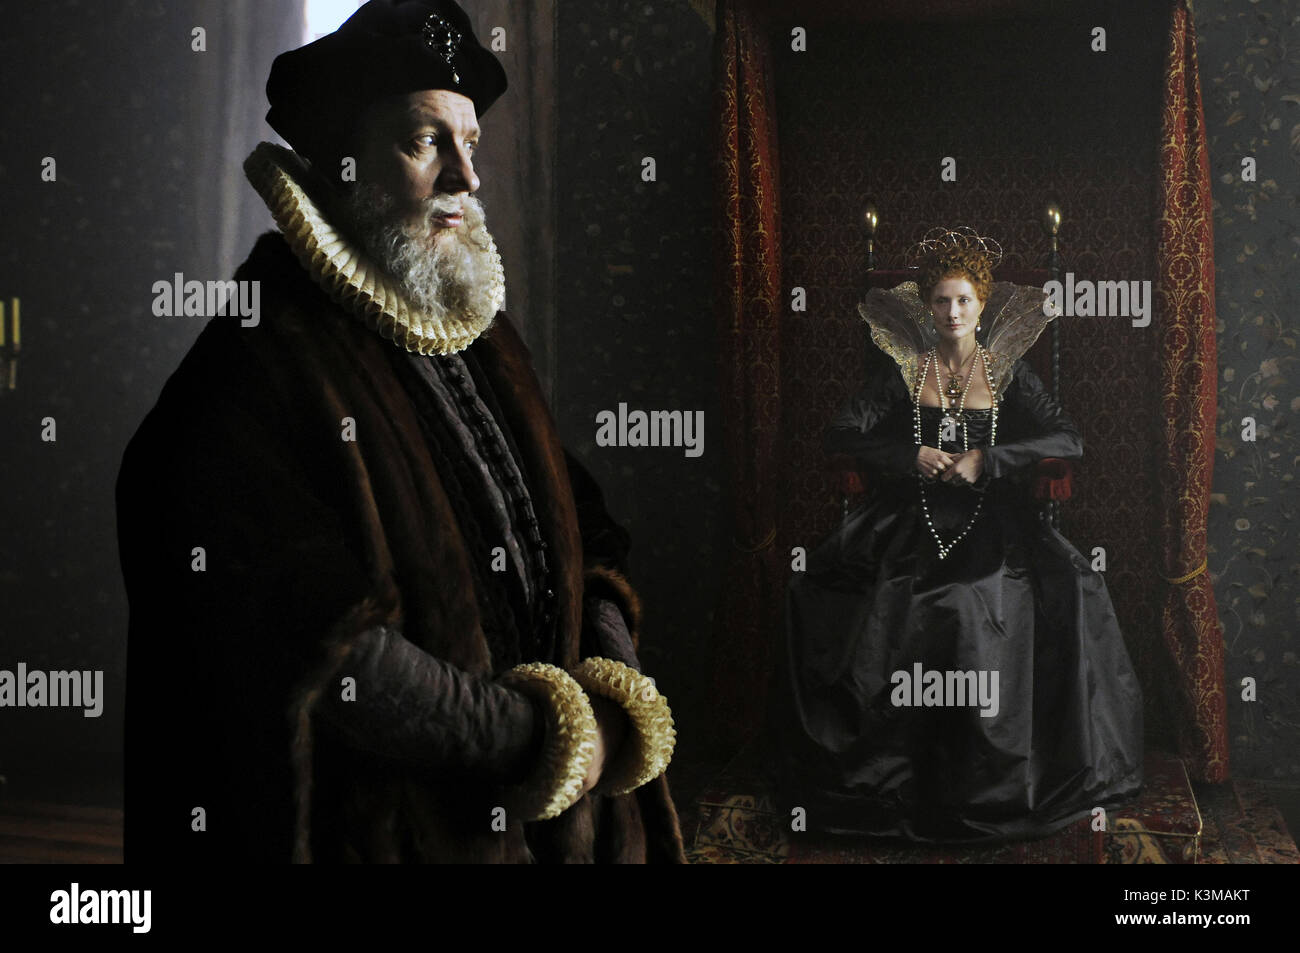 ANONYMOUS [BR / GER / US 2011] [L-R] DAVID THEWLIS as William Cecil, JOELY RICHARDSON as Queen Elizabeth I     Date: 2011 Stock Photo